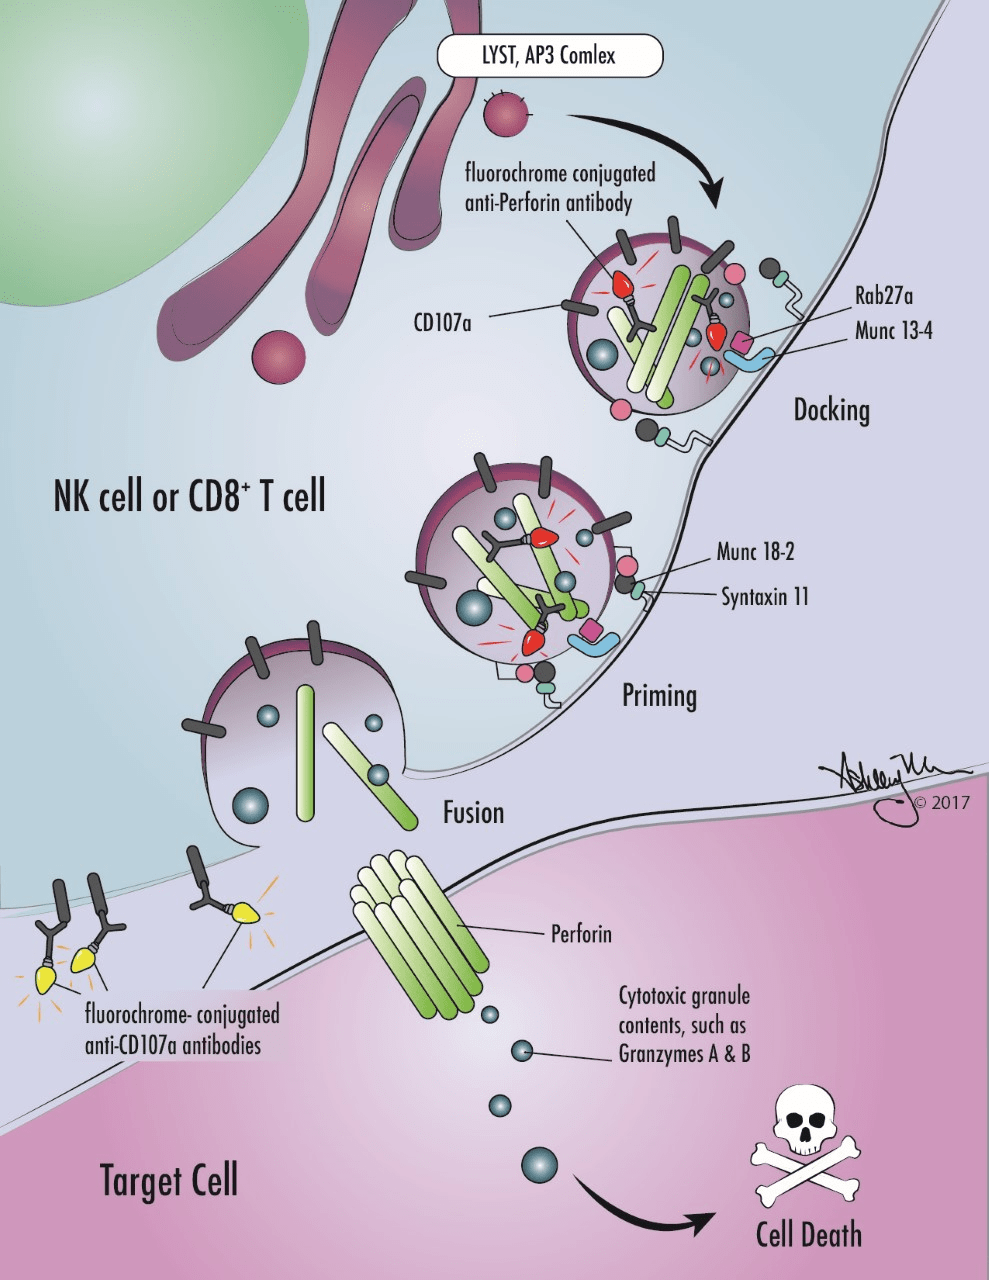 Illustration of involvement of selected primary HLH proteins in cytotoxic lymphocyte degranulation and target cell killing. Antibodies against markers used in selected screening diagnostics are also shown (perforin and CD107a).